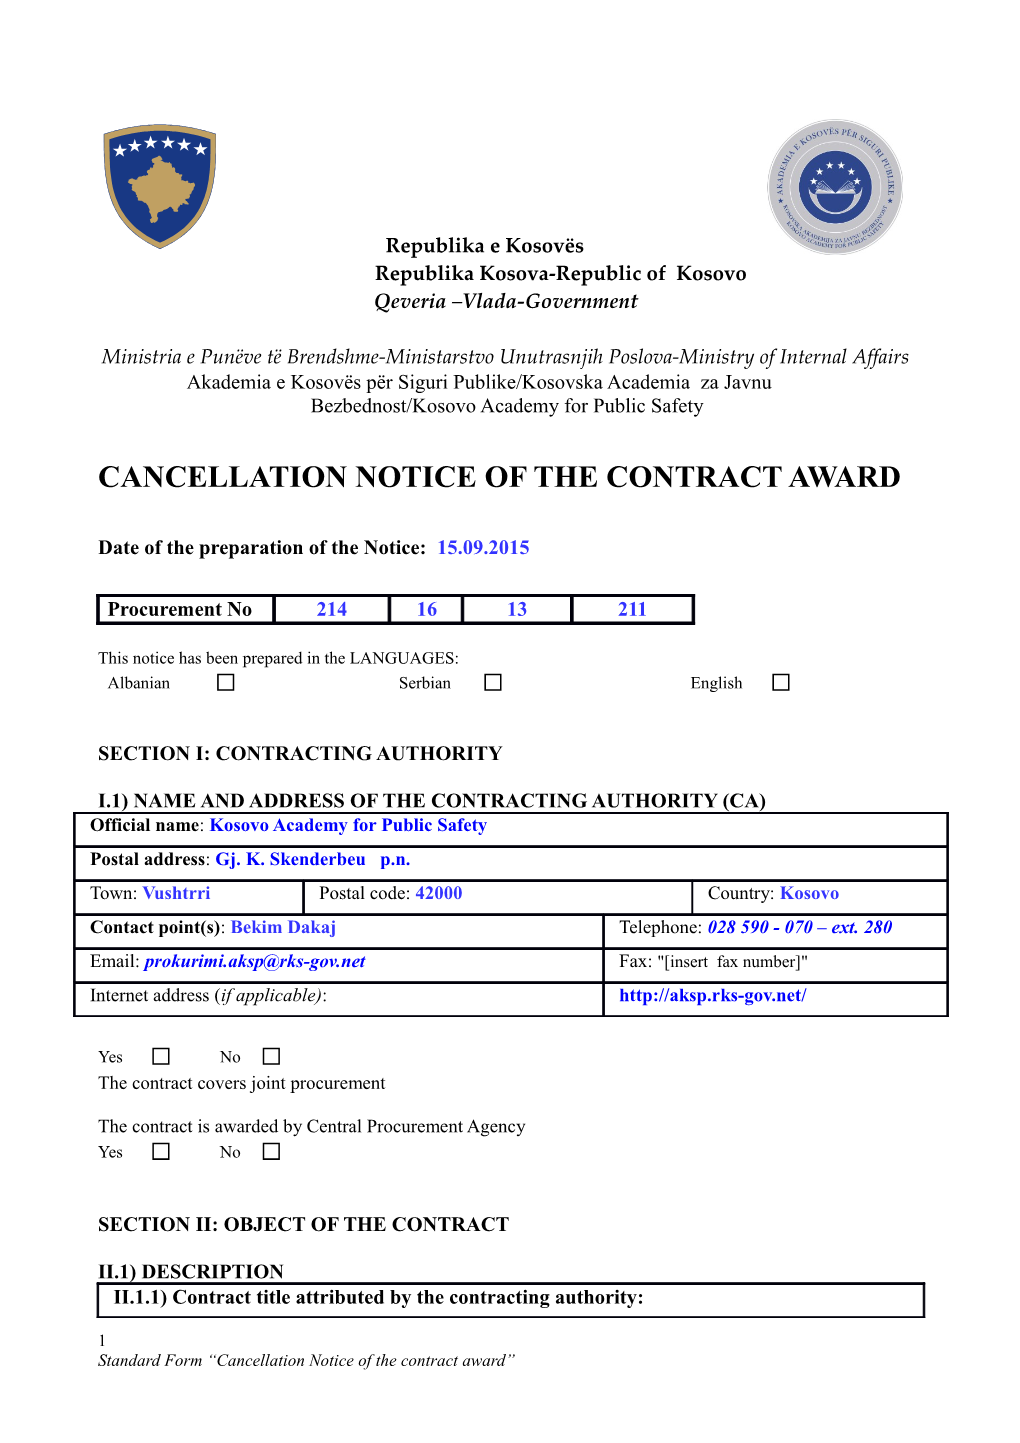 Cancellation Notice of the Contract Award